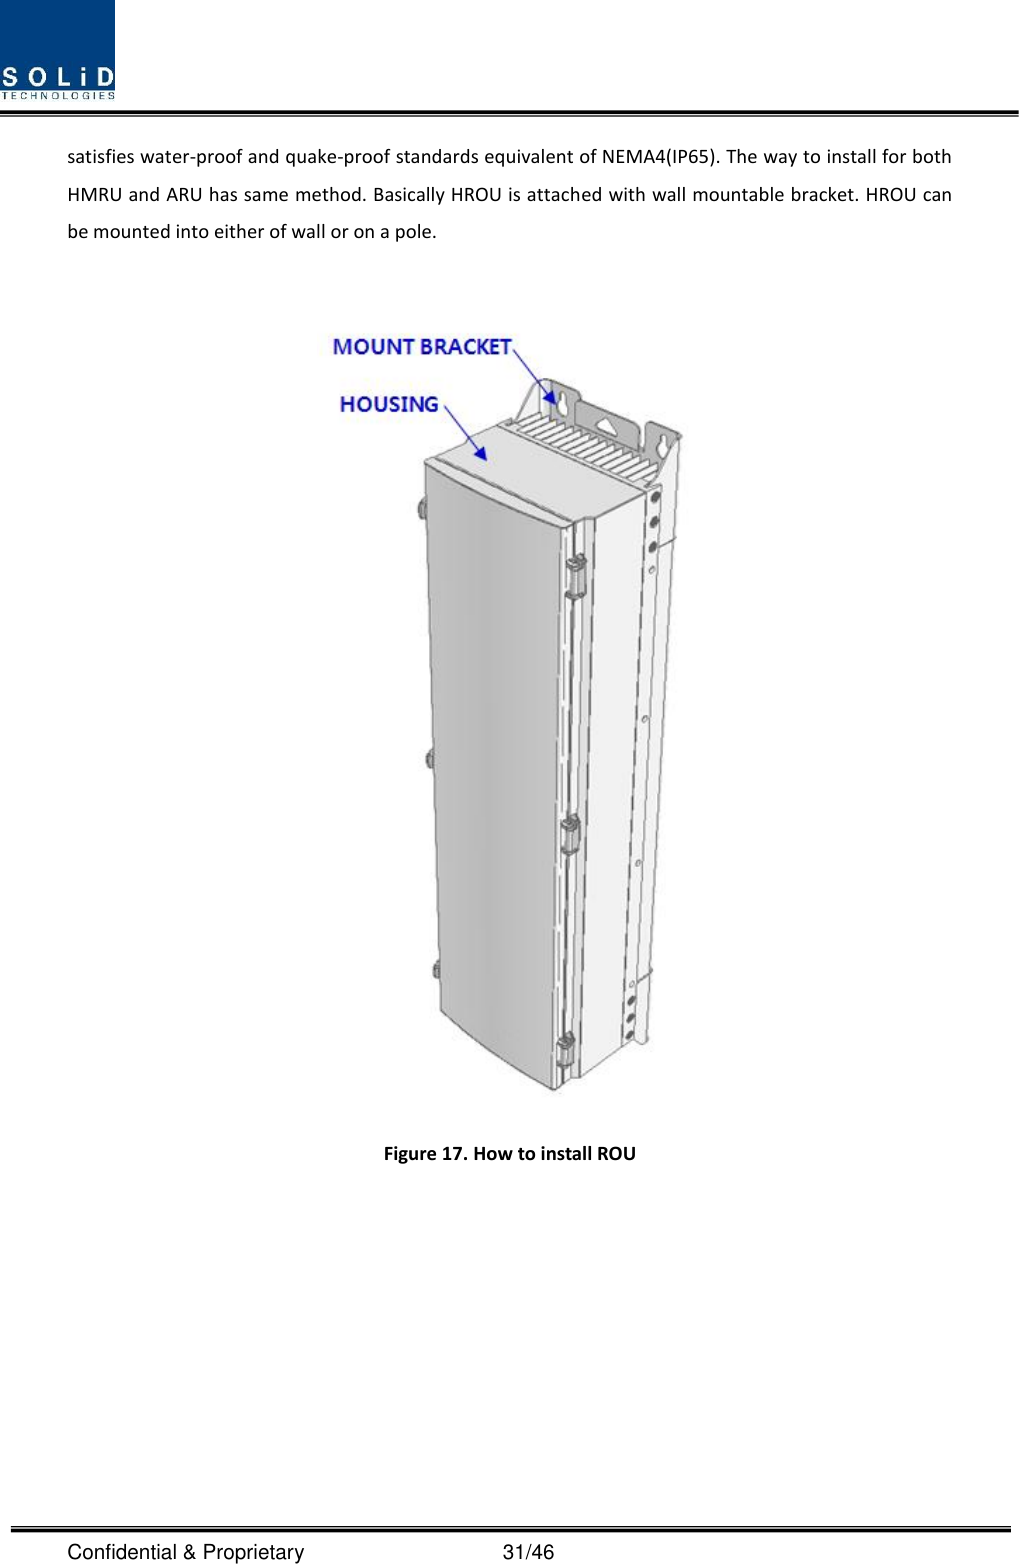  Confidential &amp; Proprietary                                      31/46 satisfies water-proof and quake-proof standards equivalent of NEMA4(IP65). The way to install for both HMRU and ARU has same method. Basically HROU is attached with wall mountable bracket. HROU can be mounted into either of wall or on a pole.     Figure 17. How to install ROU      